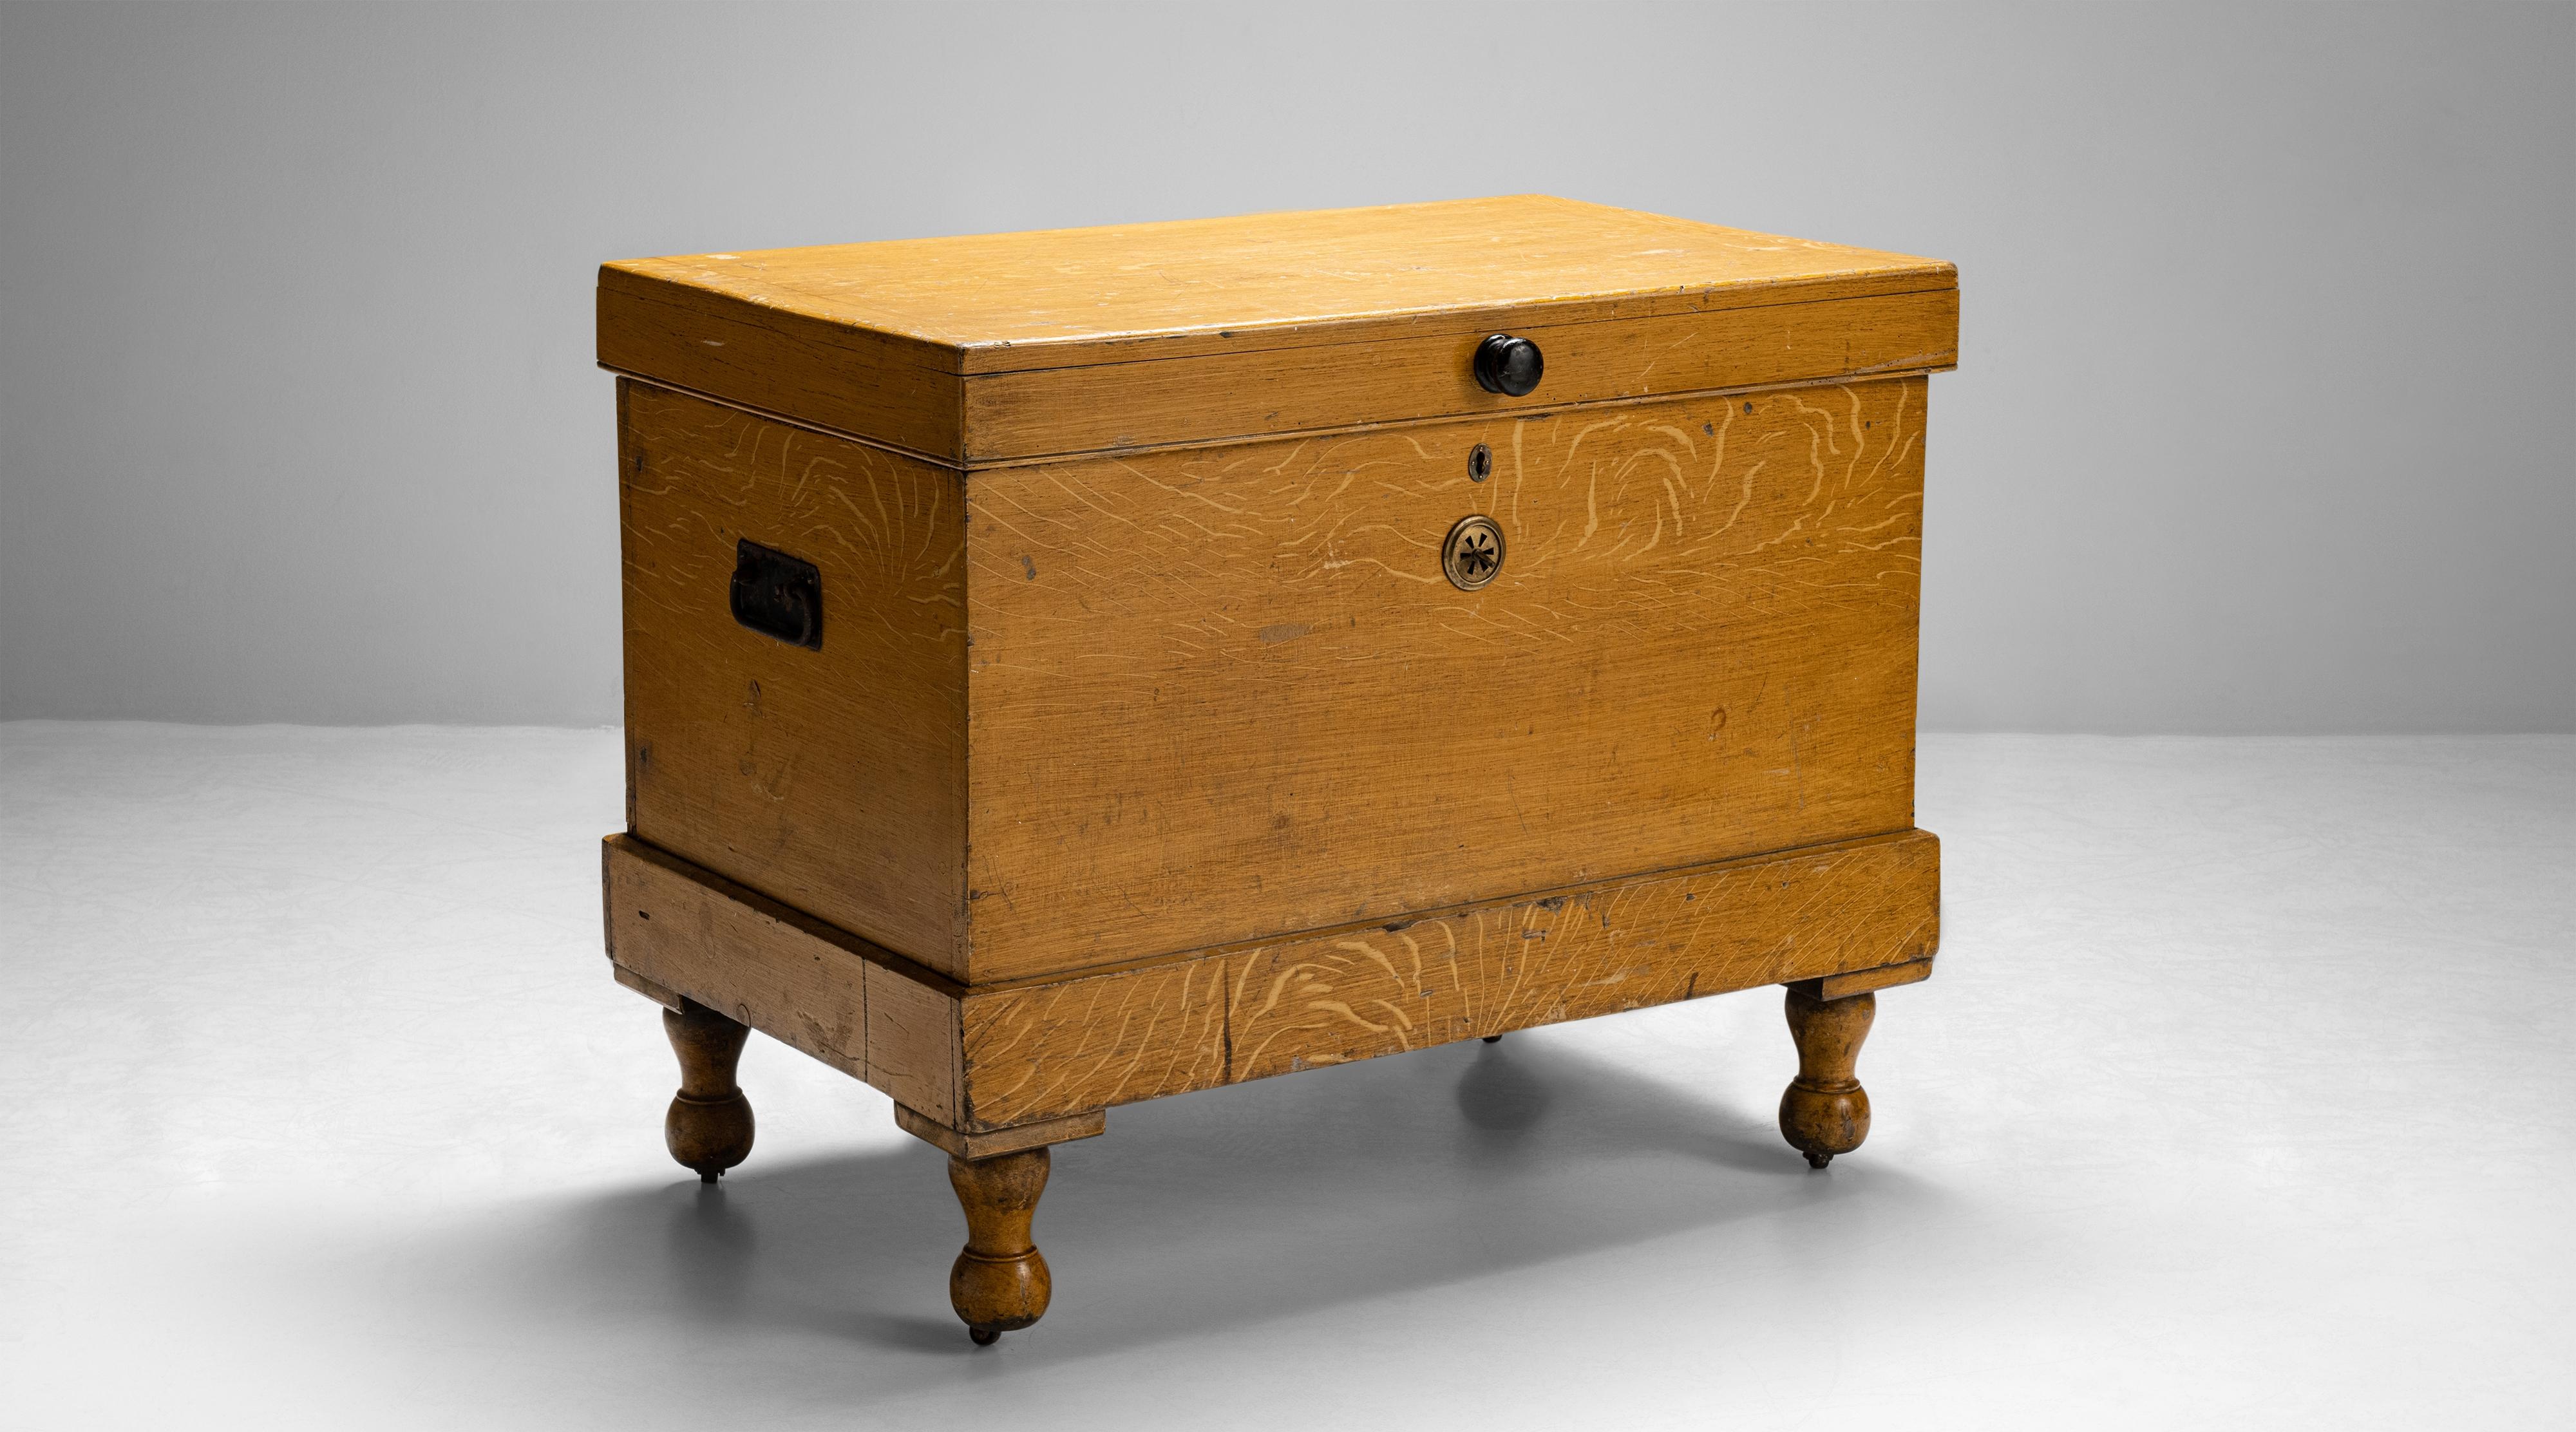 Faux oak chest
England circa 1890
Large country house ice box with faux oak painted decoration on baluster turned legs with inset castors.
Measures: 39.25